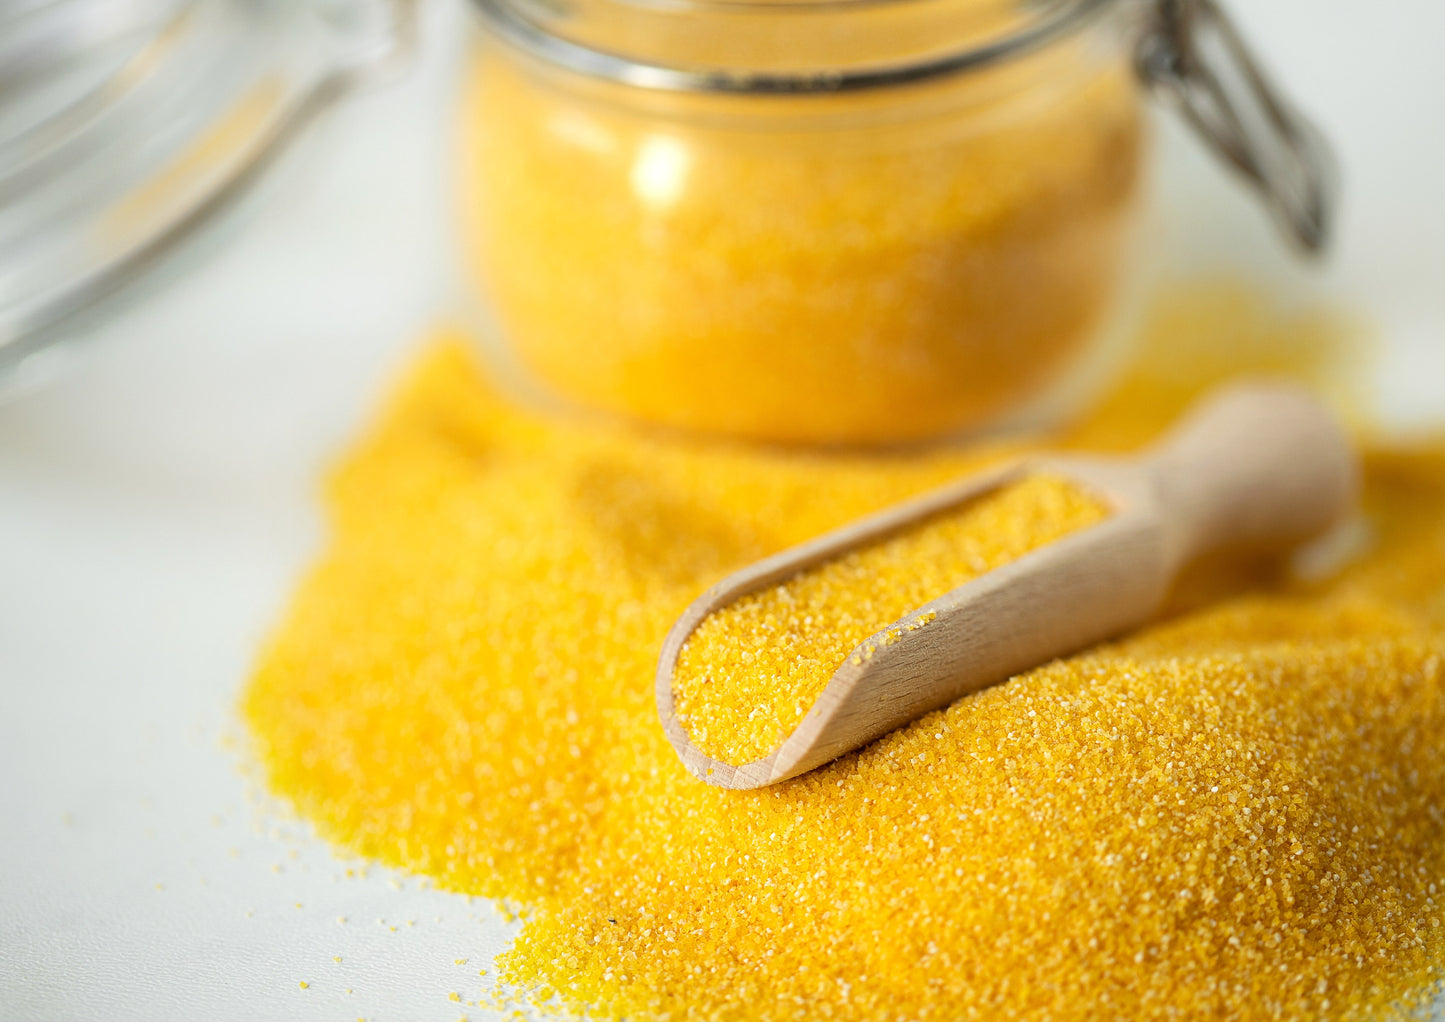 Yellow Polenta – Finely Ground Cornmeal, Vegan, Kosher, Bulk. Product of Italy. Easy to Cook. Creamy, Smooth Texture. Rich in Antioxidants. Great as a Side Dish, and for Hot Cereal, Porridge